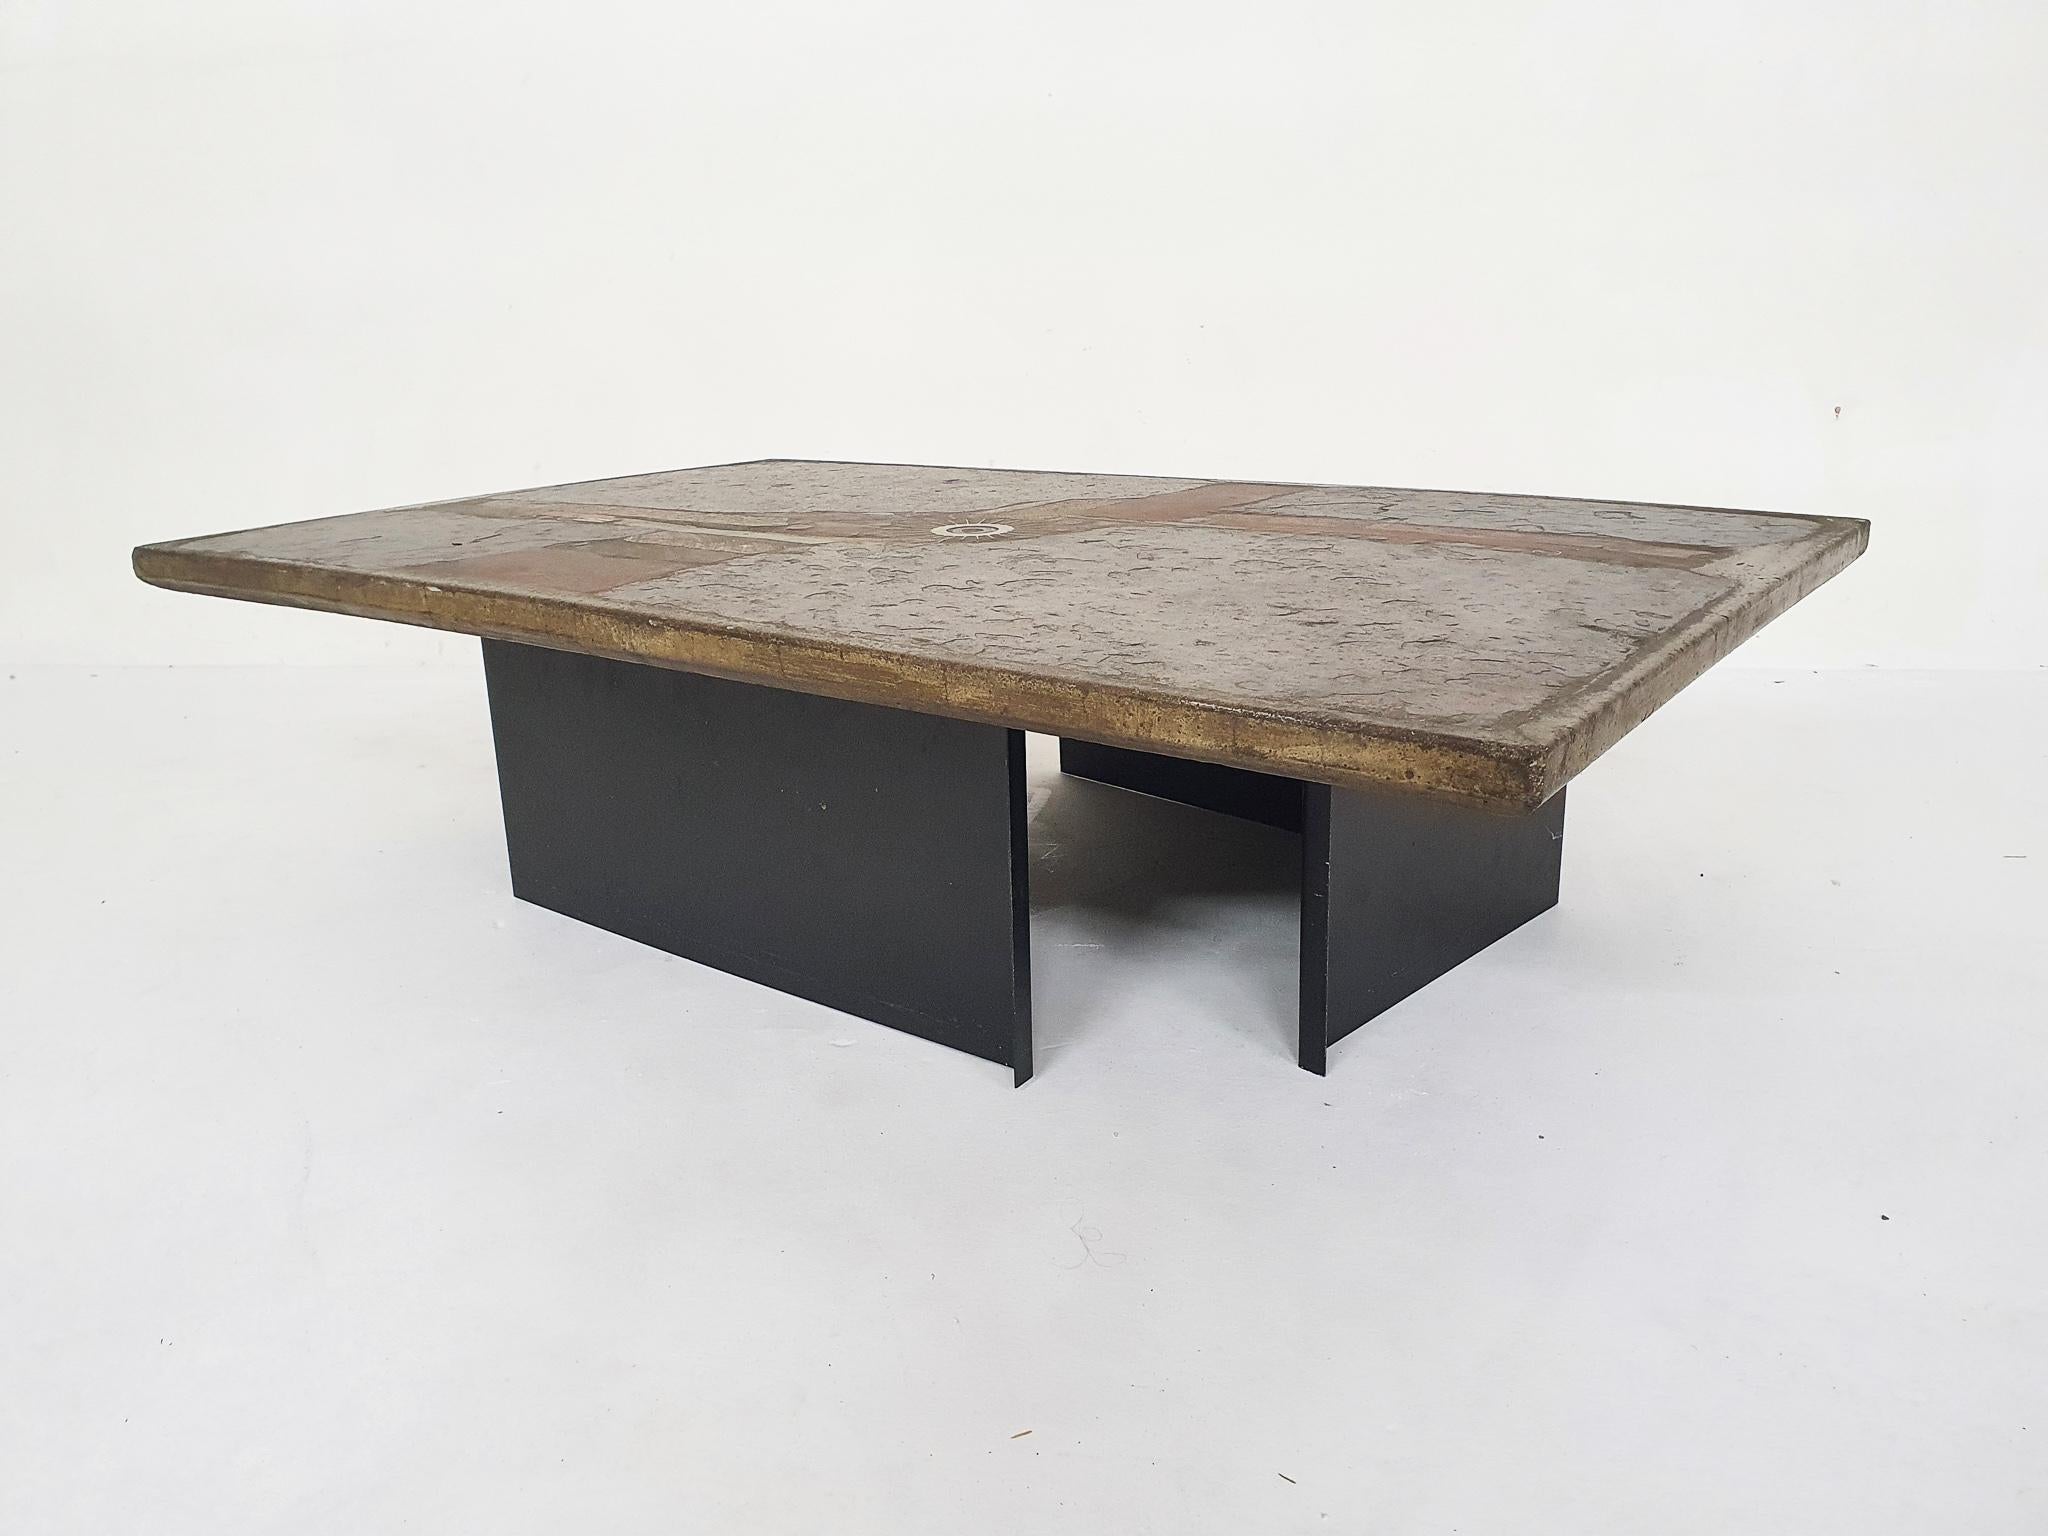 Stone coffee table on two L-shaped metal plates. Desiged and signed by artist Paul Kingma.

Paul Kingma, born in 1931, was a Dutch Sculptor and mosaic artist. In his early years he studied art in Arnhem and became a teacher at the State Academy of